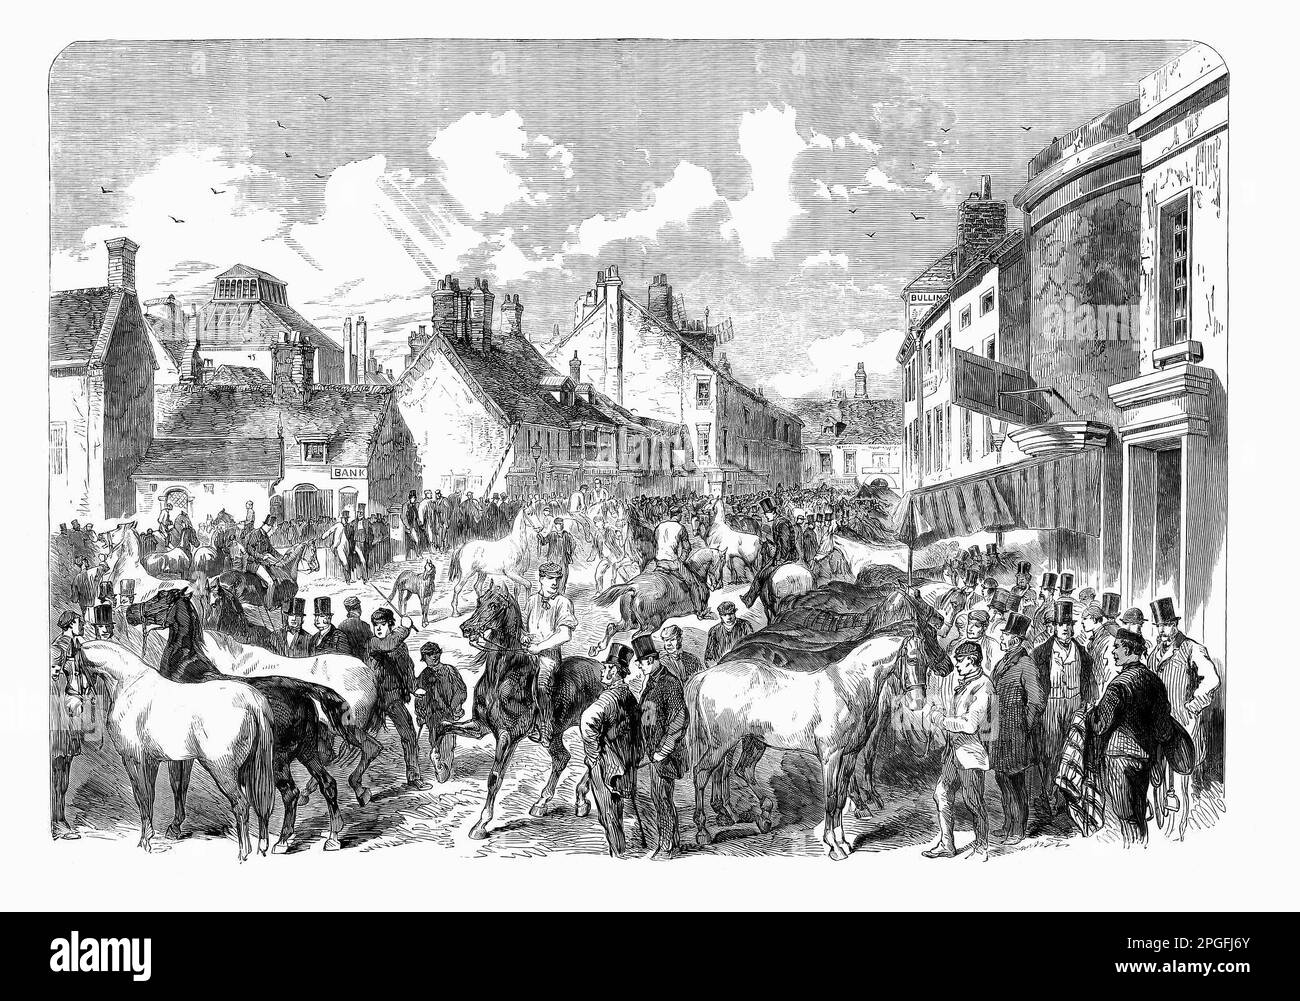 The 1864 annual Horse Fair at Horncastle, Lincolnshire, England. A charter was granted in 1229 to celebrate the Feast of St Lawrence, and by at least 1306, Lincolnshire was the leading horse breeding district in the county and almost every farmer bred horses to sell at the Horncastle Fair. Stock Photo